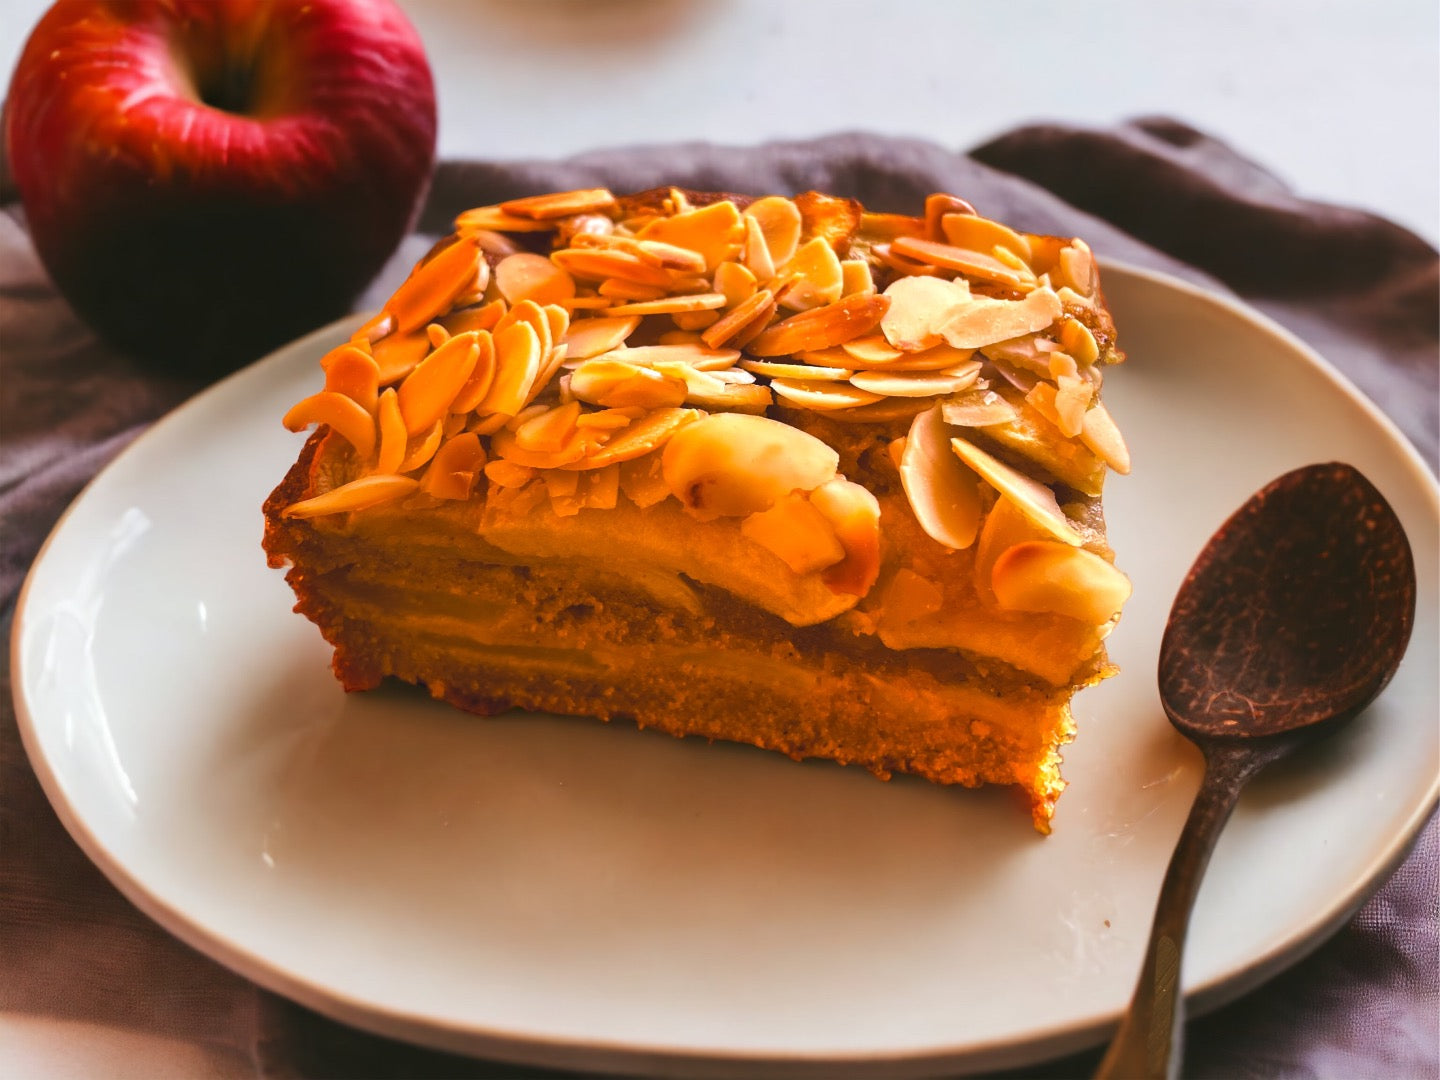 Fresh, hand-picked apples are sliced to perfection and generously layered throughout our Apple Almond Cake.